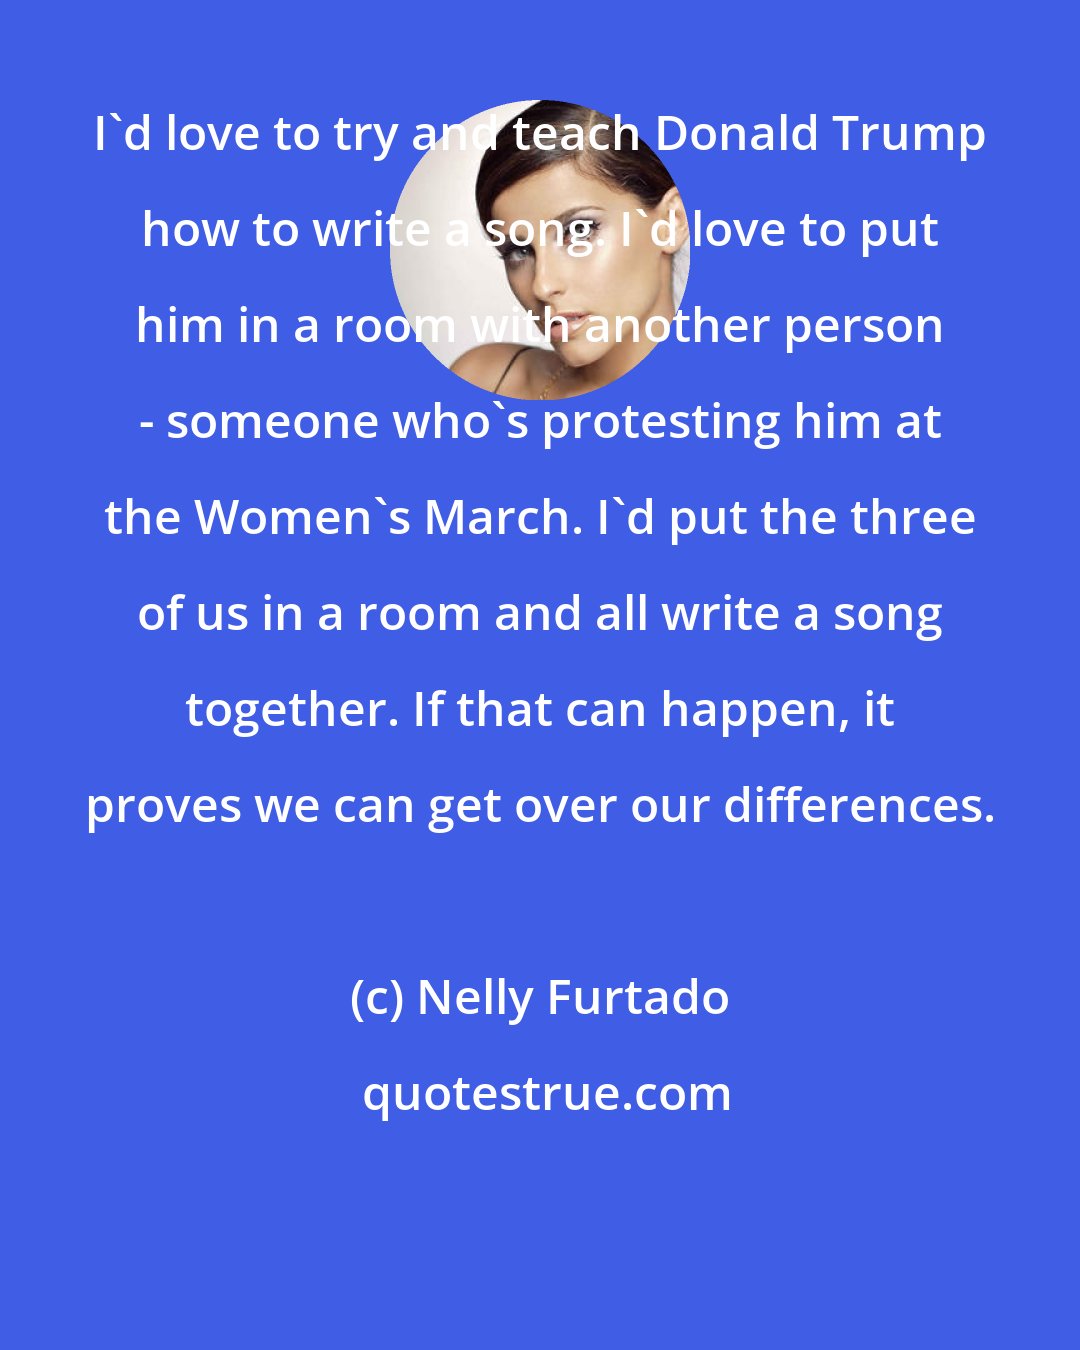 Nelly Furtado: I'd love to try and teach Donald Trump how to write a song. I'd love to put him in a room with another person - someone who's protesting him at the Women's March. I'd put the three of us in a room and all write a song together. If that can happen, it proves we can get over our differences.